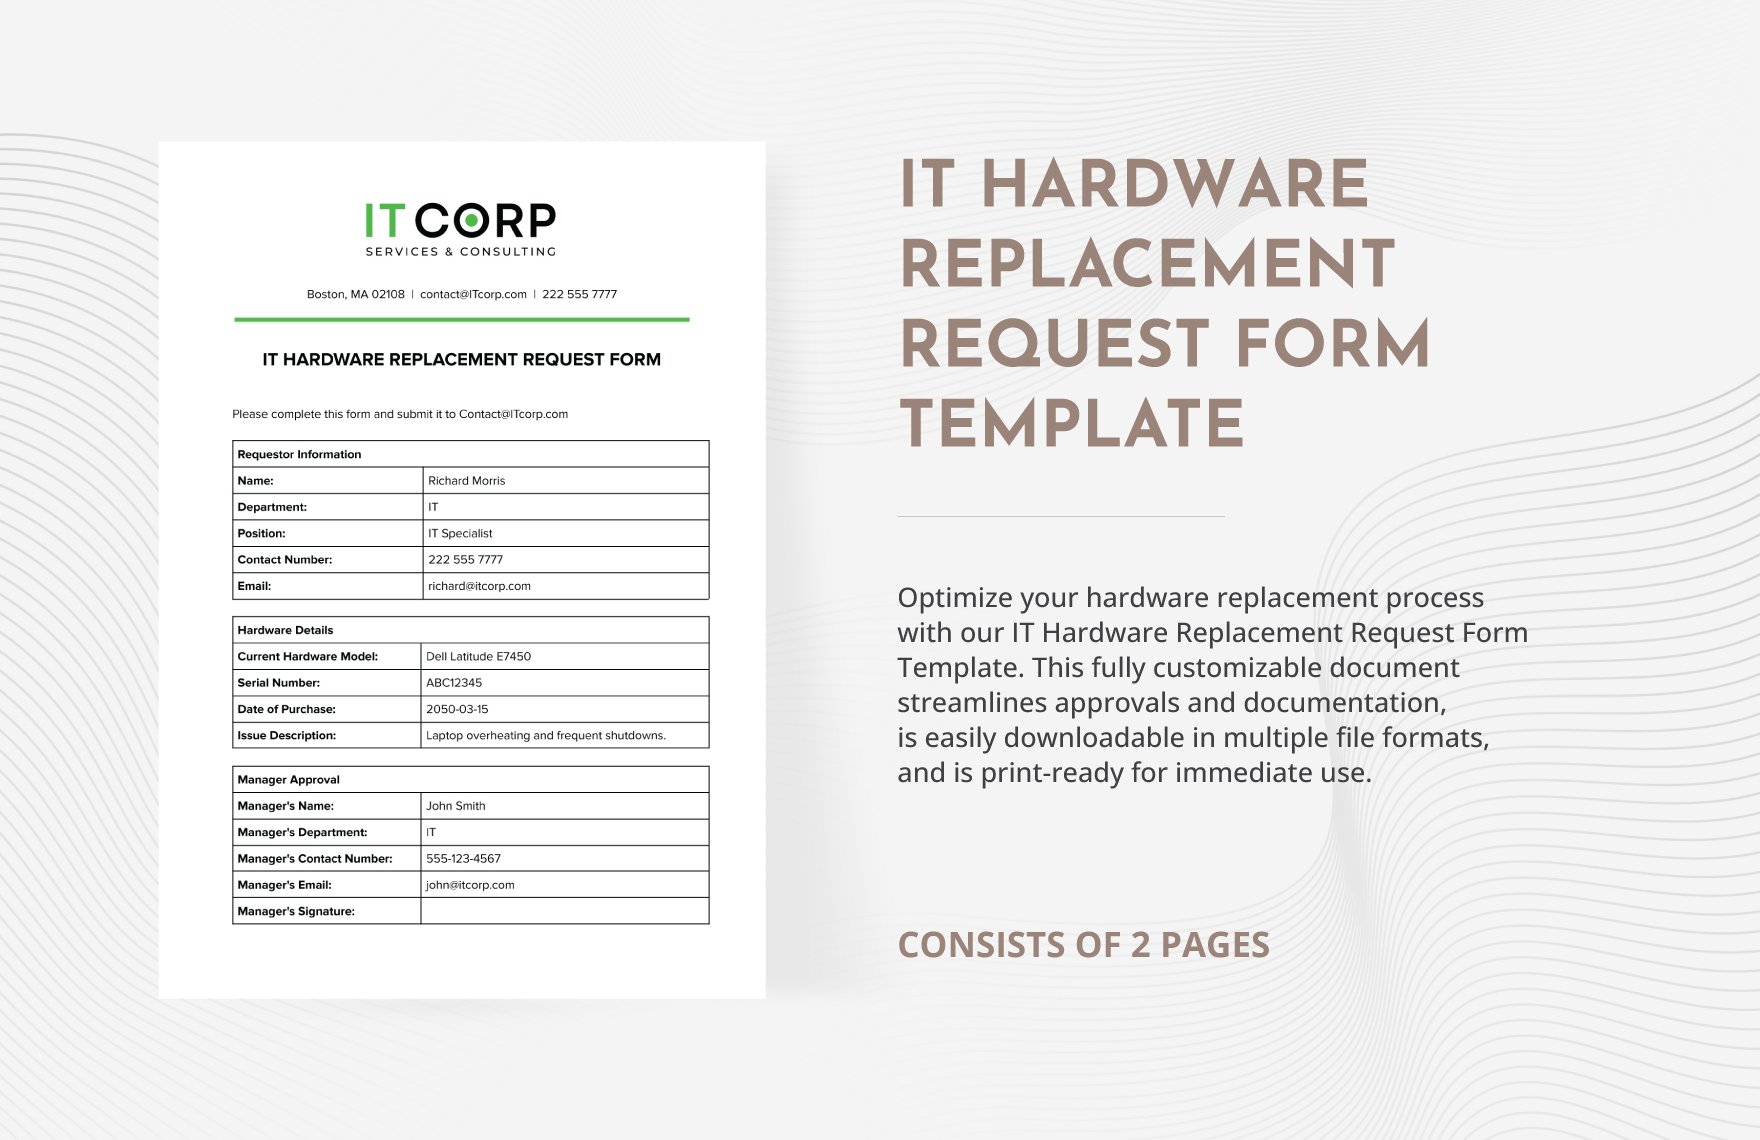 IT Hardware Replacement Request Form Template